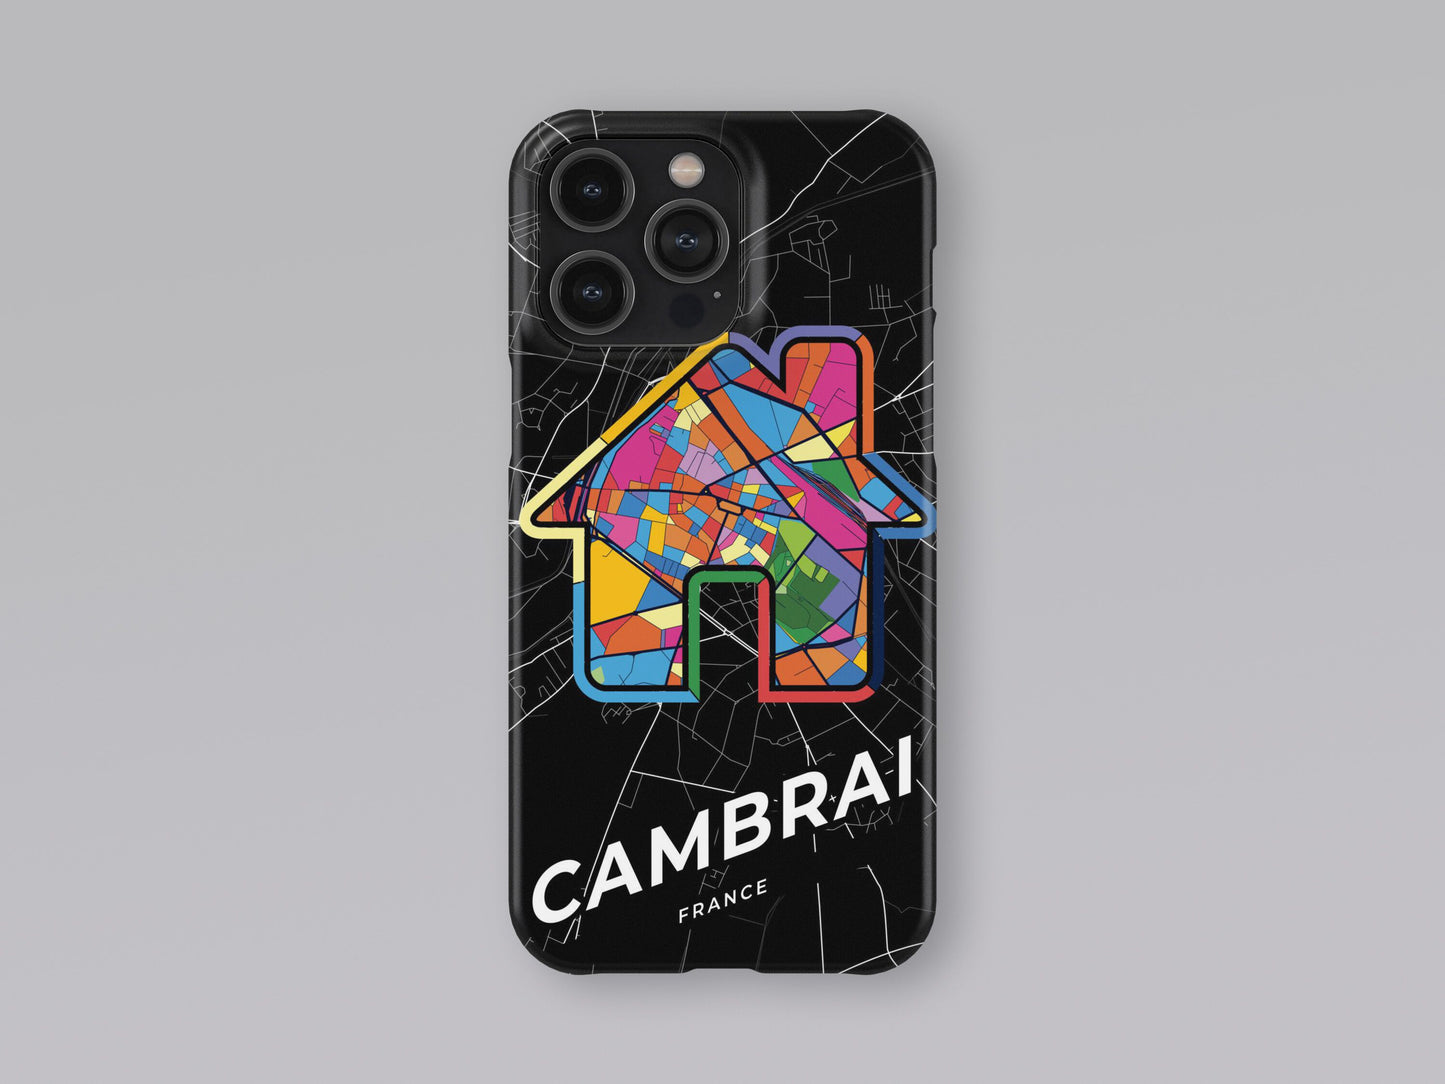 Cambrai France slim phone case with colorful icon. Birthday, wedding or housewarming gift. Couple match cases. 3